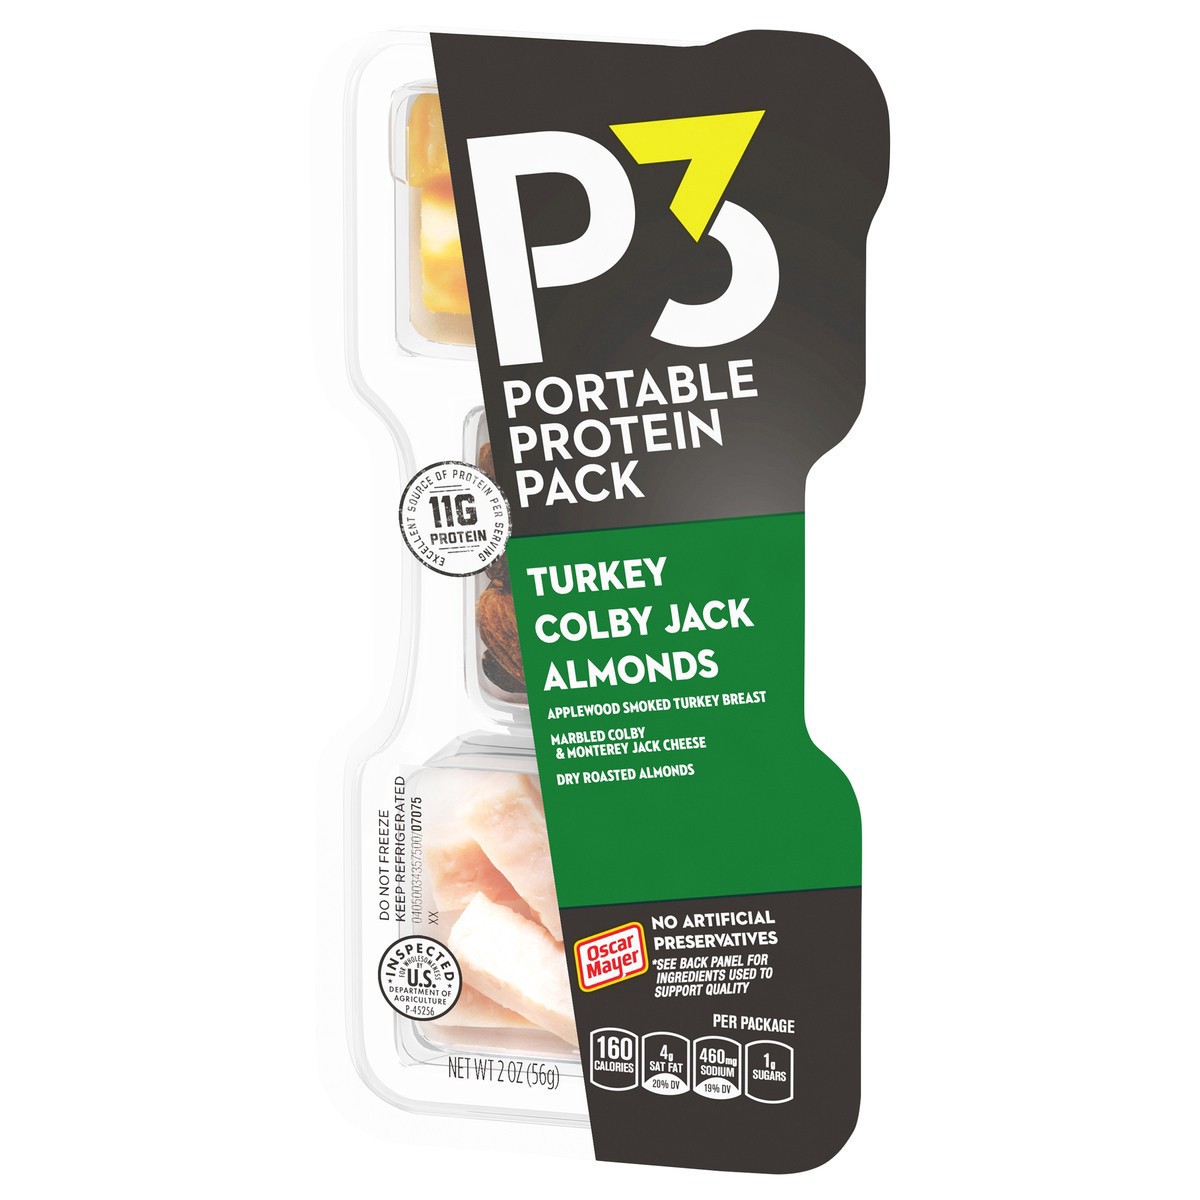 slide 3 of 9, P3 Portable Protein Pack Turkey, Almonds Colby Jack Cheese, for a Low Carb Lifestyle, 2 oz Tray, 2 oz